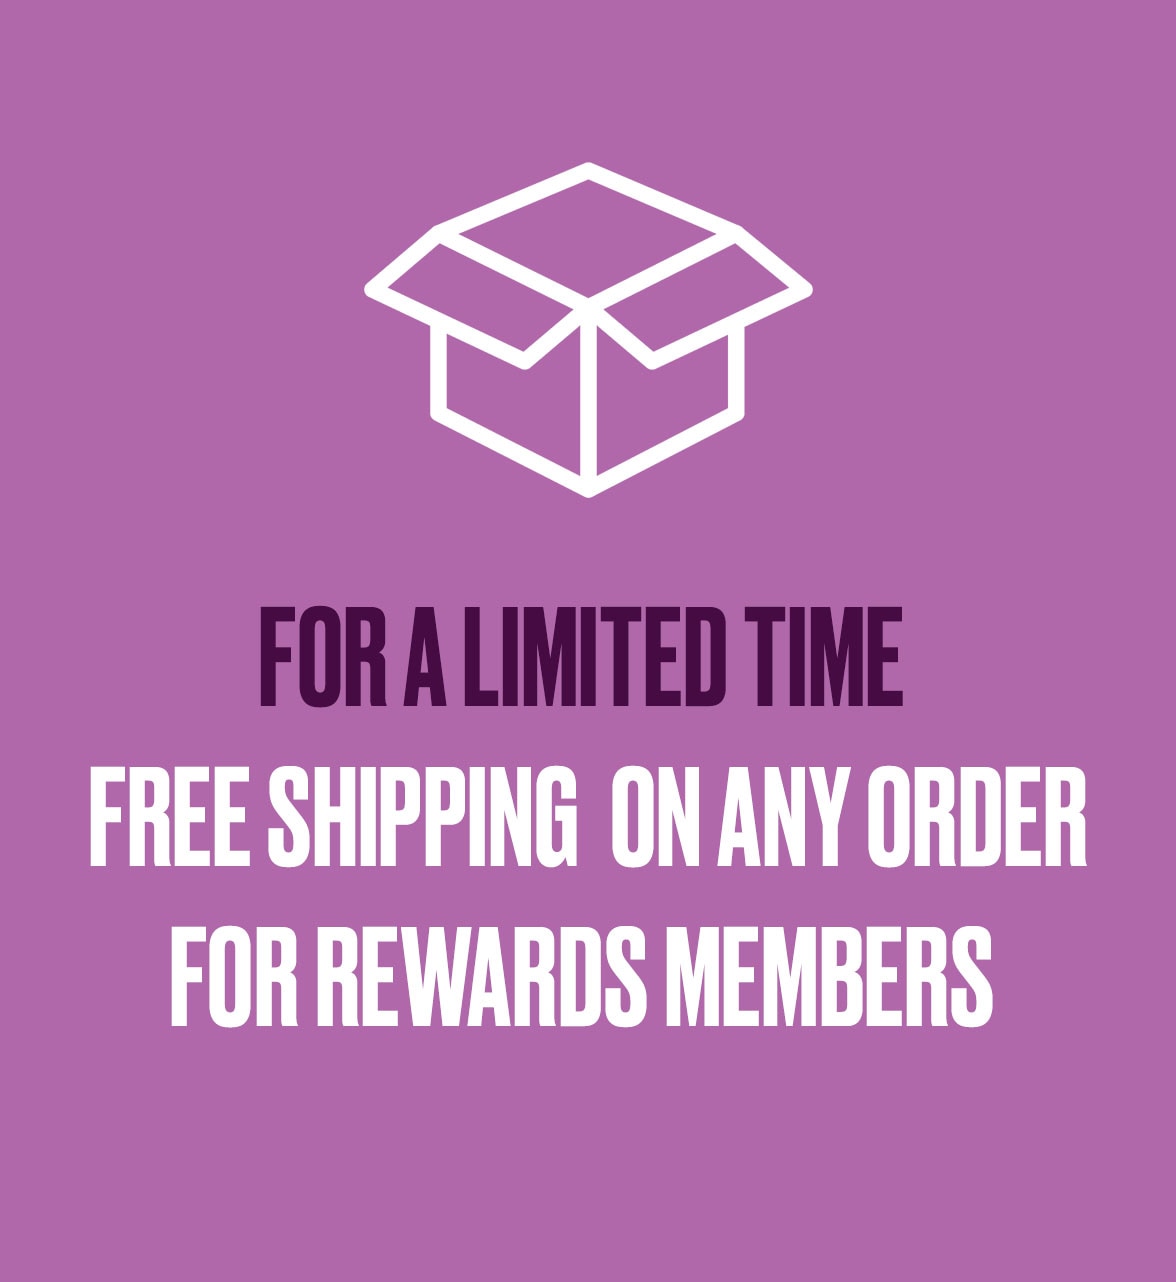 for a limited time! free shipping on any order for rewards members